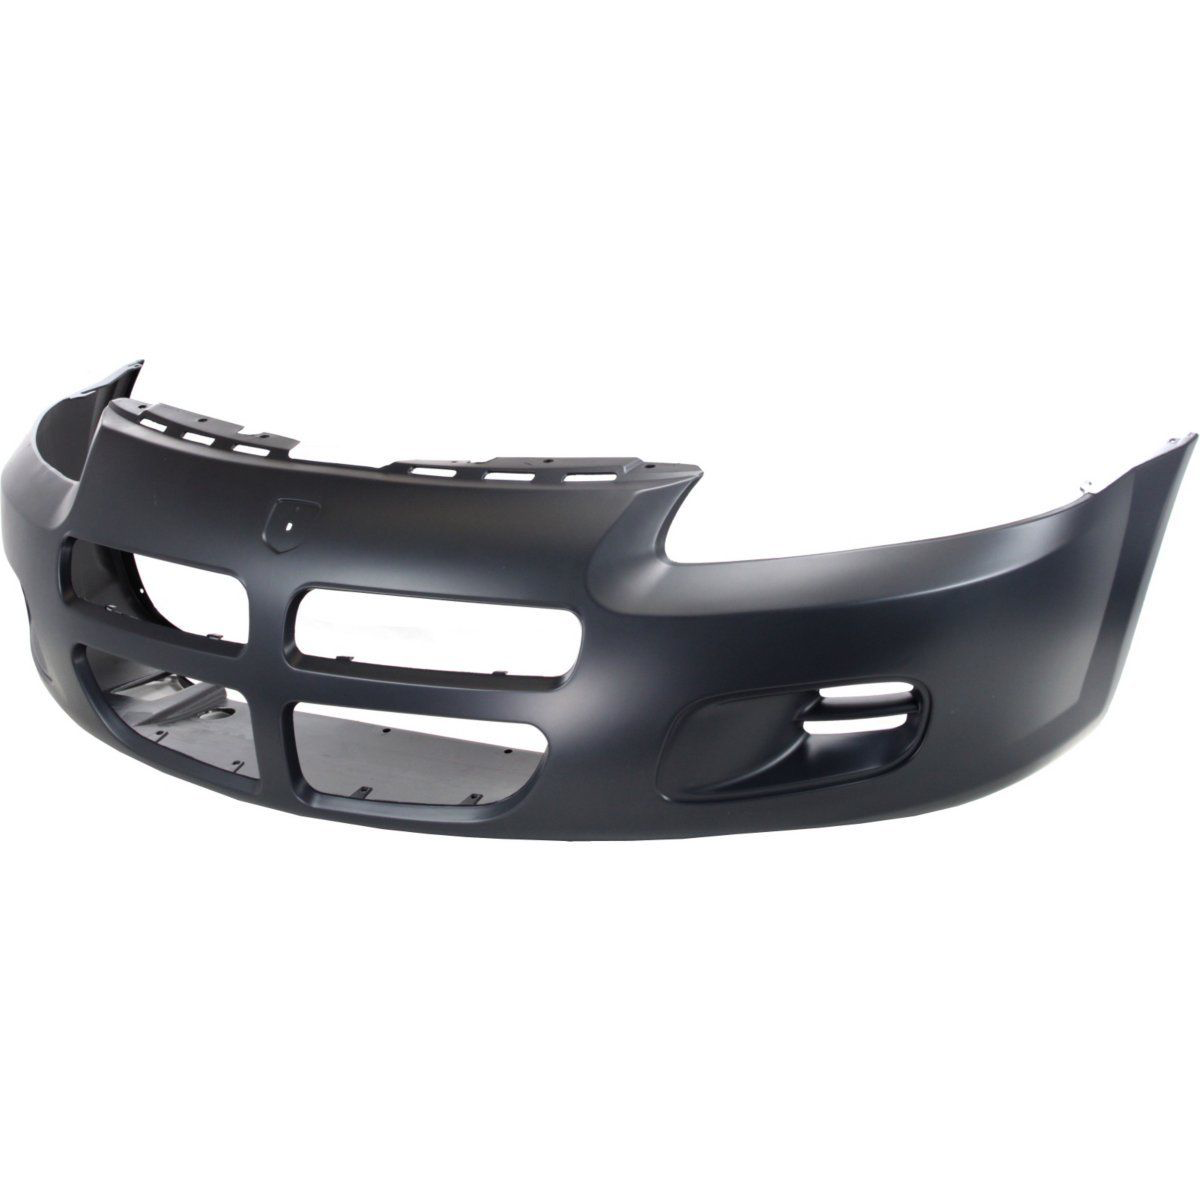 2001-2003 DODGE STRATUS Front Bumper Cover 4dr sedan  w/o Fog Lamps Painted to Match